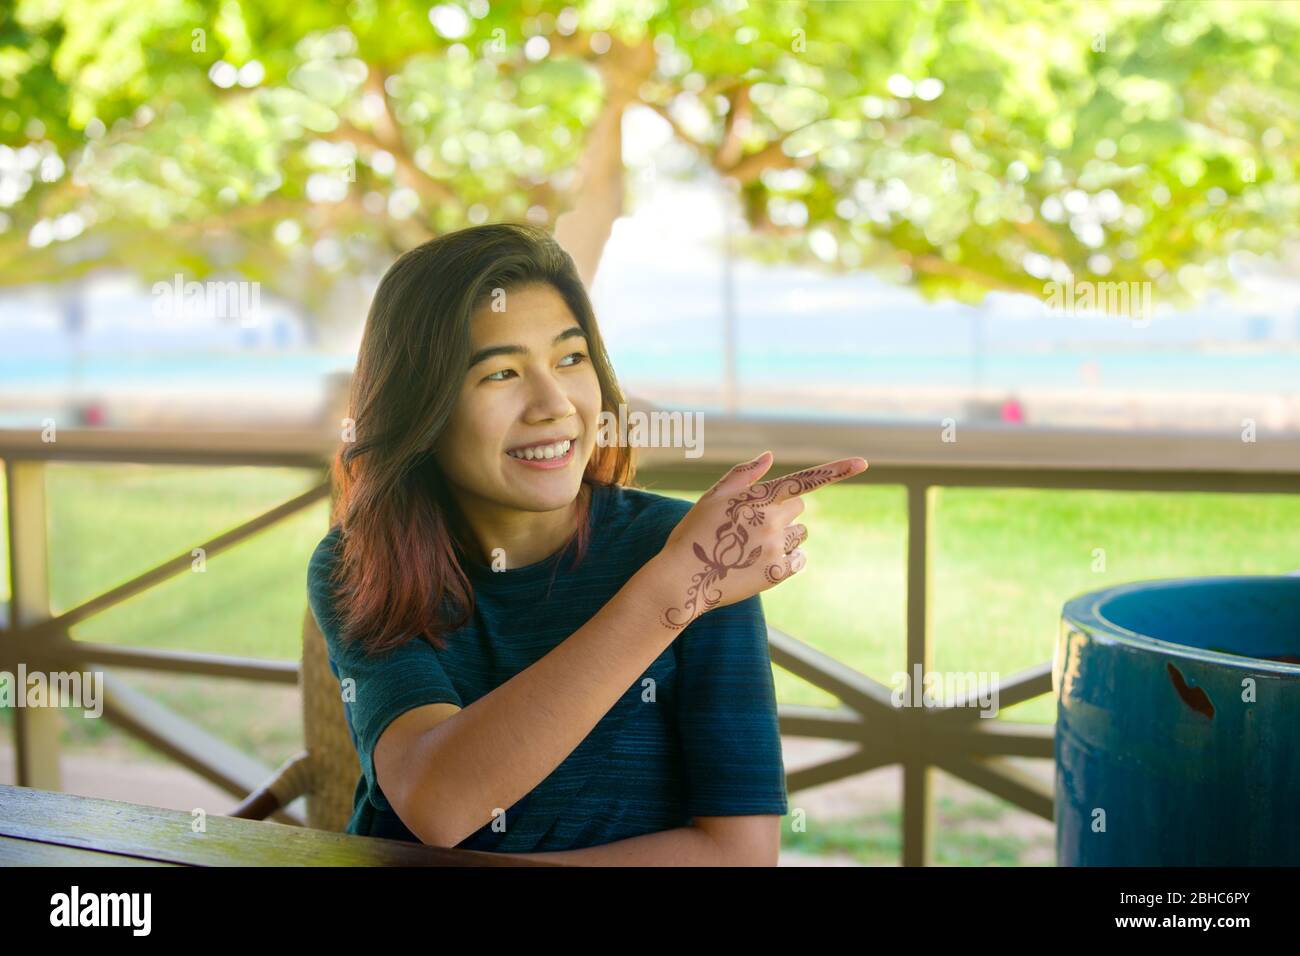 Smiling biracial Asian teen girl smiling and pointing with henna applied hand to something to her left while sitting in an outdoor restaurant with sun Stock Photo